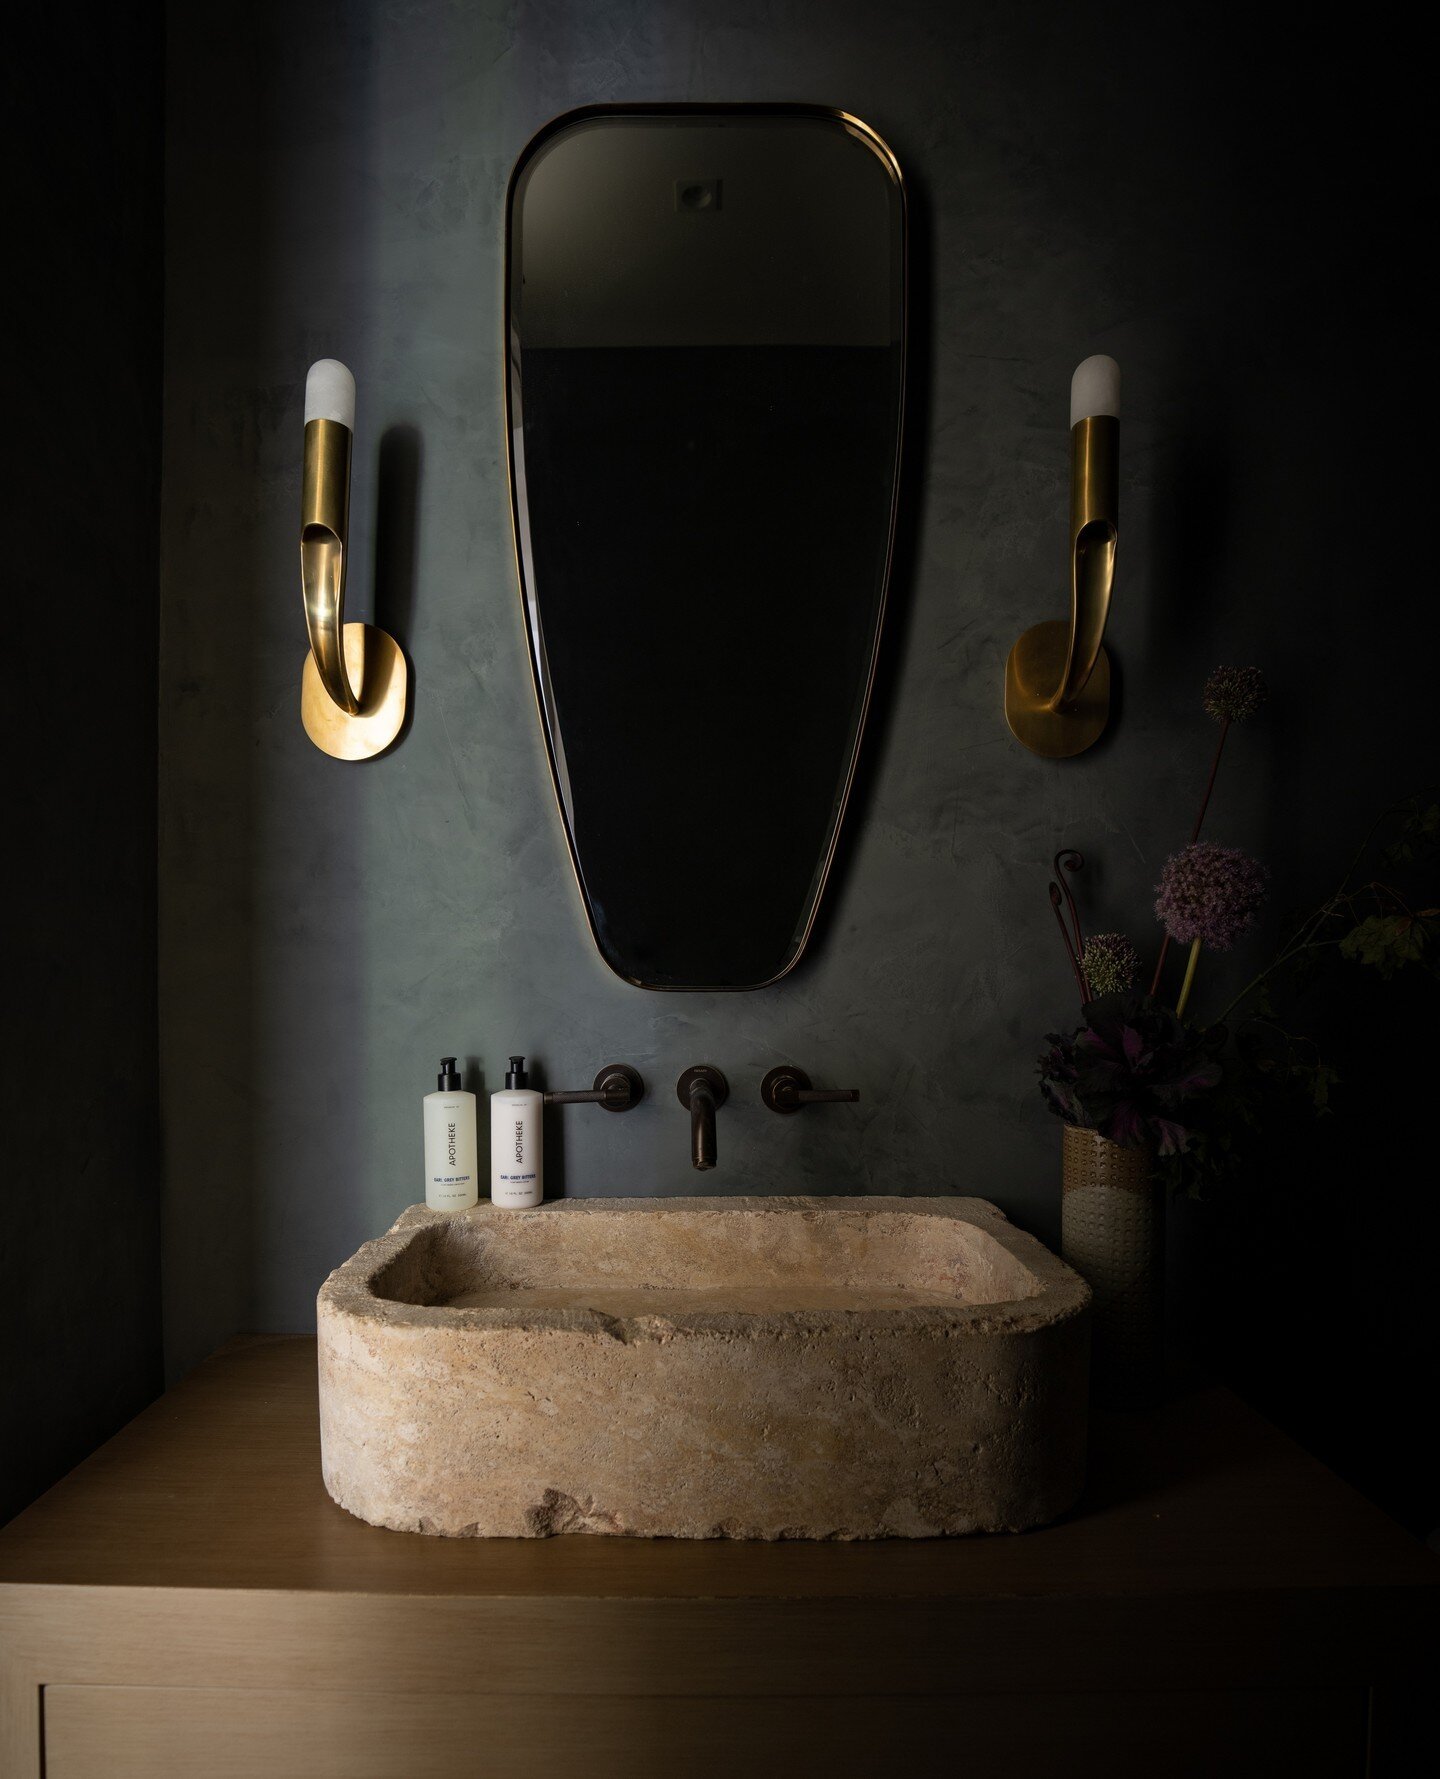 Smoke &amp; Mirrors.⁠
⁠
Welcome guests into this beautiful powder bath. Reflective surfaces set in a smoky setting accented by aged stone. The perfect juxtaposition of old and new.⁠
⁠
#laurabrophyinteriors